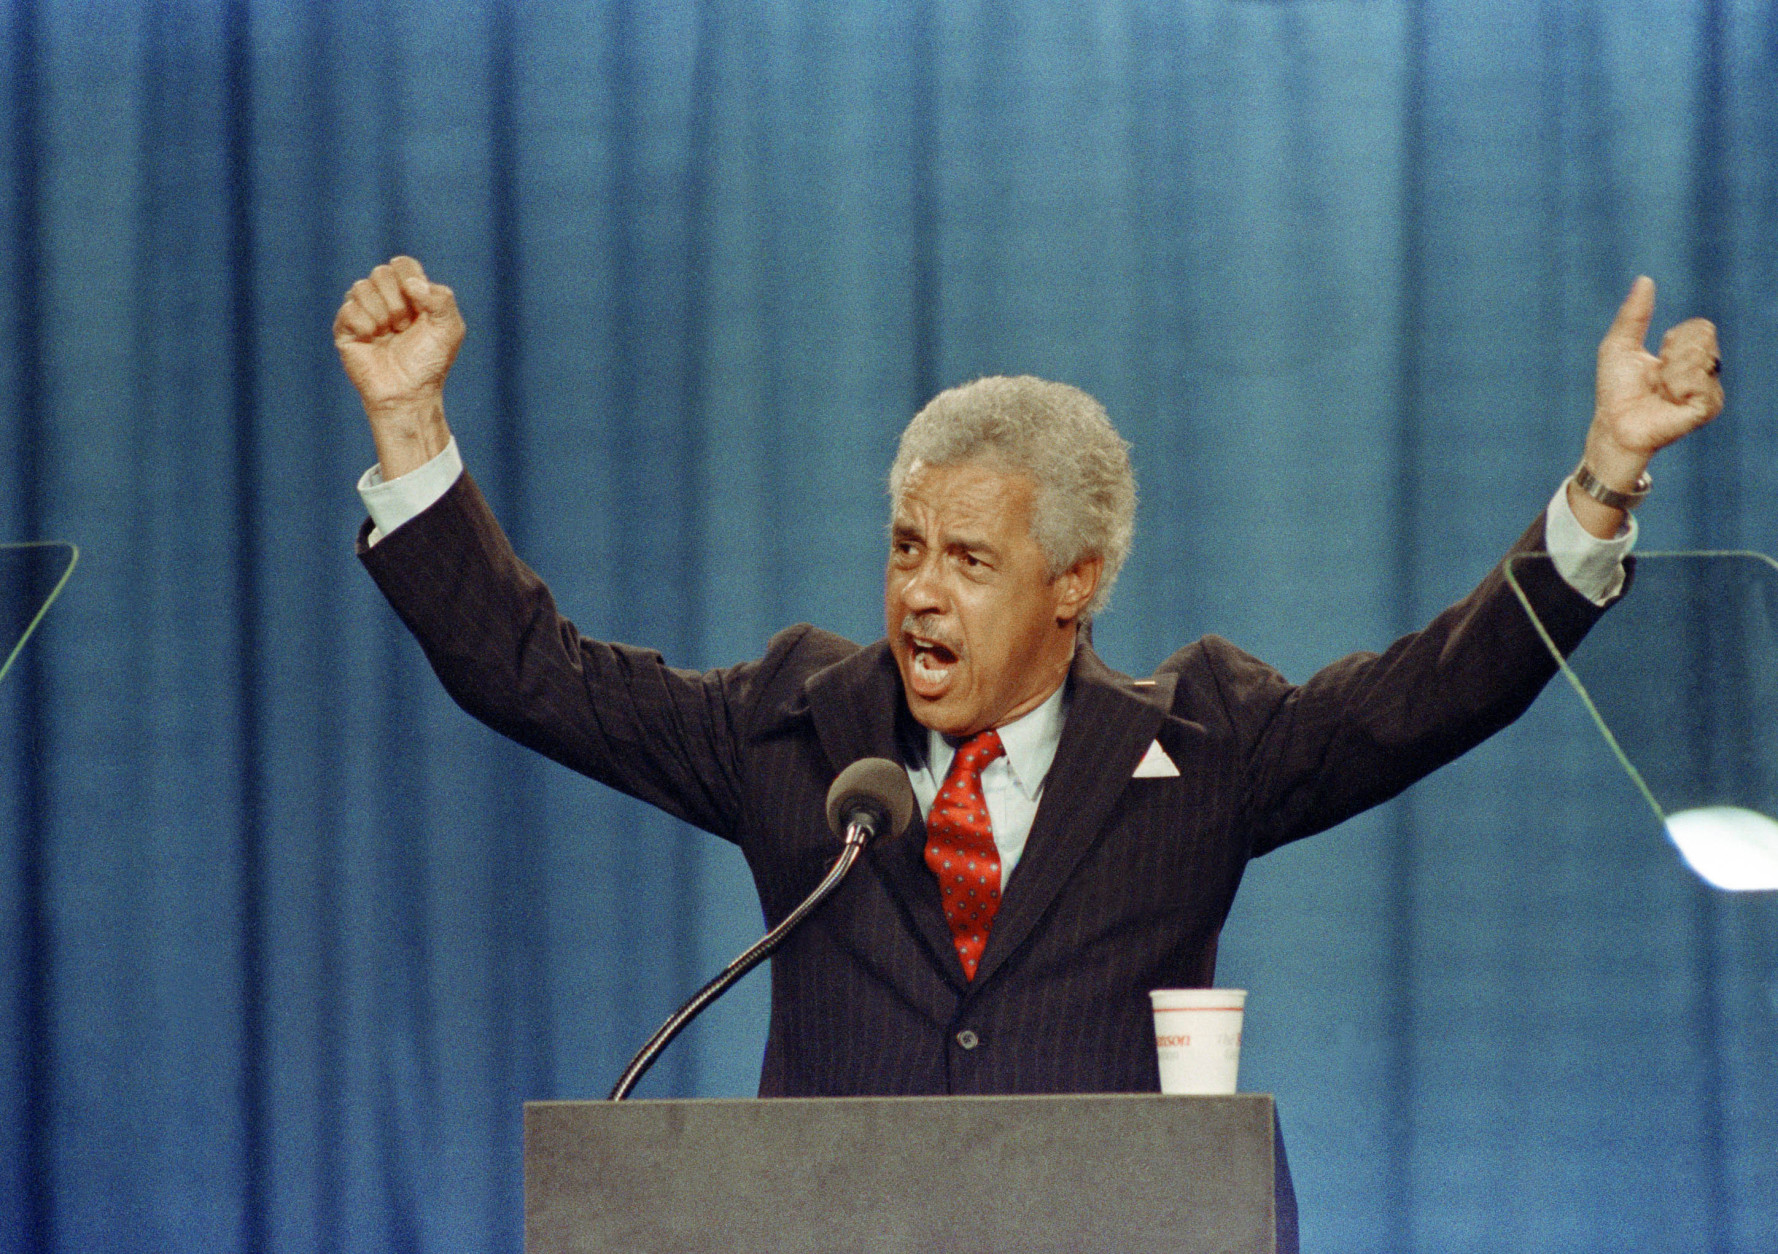 **FILE** In this Sept. 18, 1989 file photo, Virginia Lt. Governor and Democratic nominee for Governor, L. Douglas Wilder, gestures during his acceptance speech at the Virginia Democratic Convention in Richmond. (AP Photo, File)